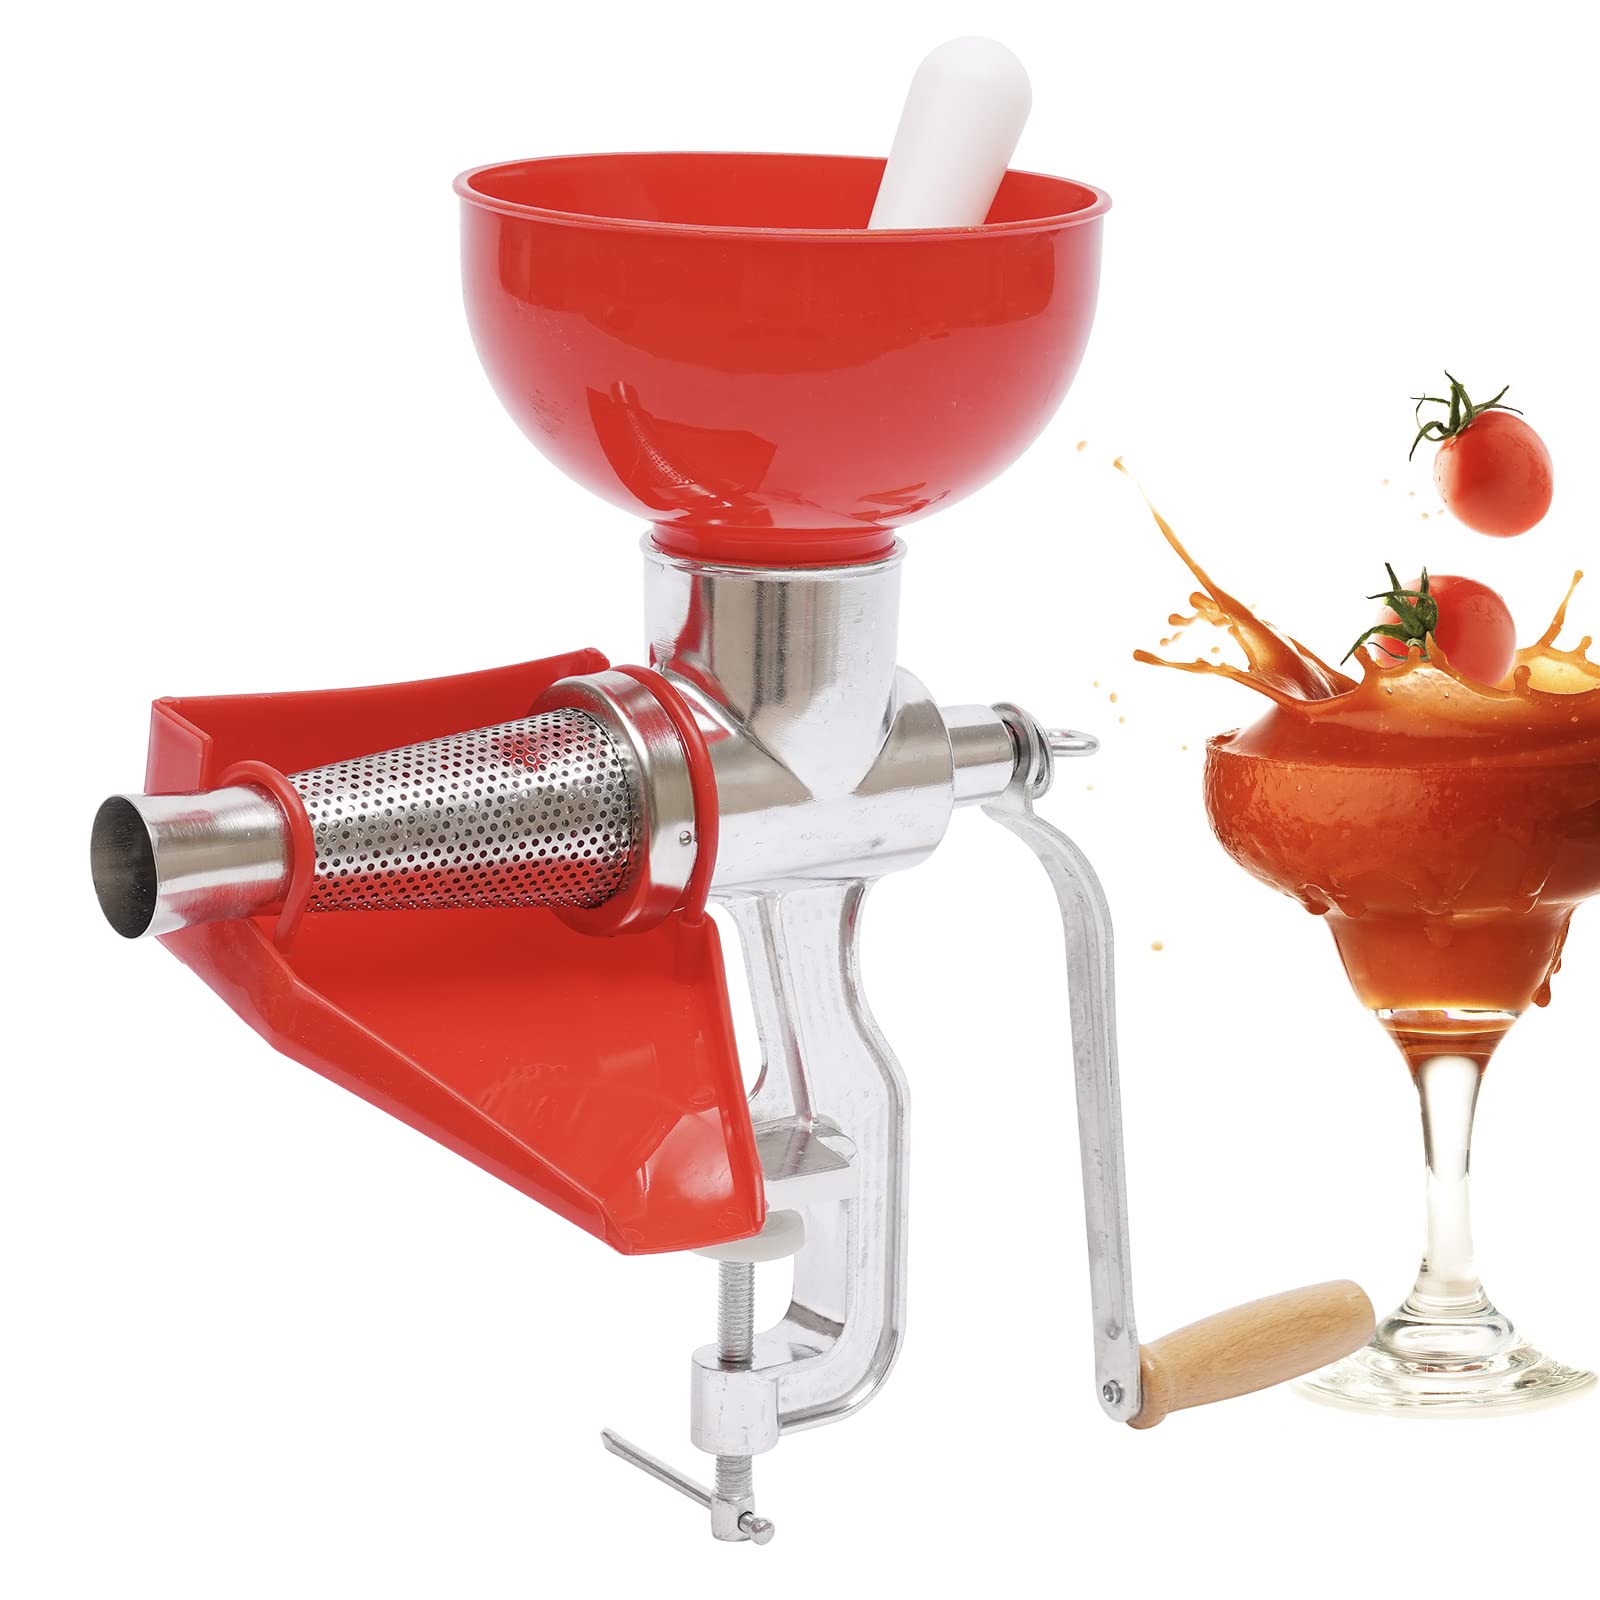 VEVOR Electric Tomato Strainer Commercial Grade Tomato Milling Machine Stainless Steel Tomato Press and Sauce Maker, Silver